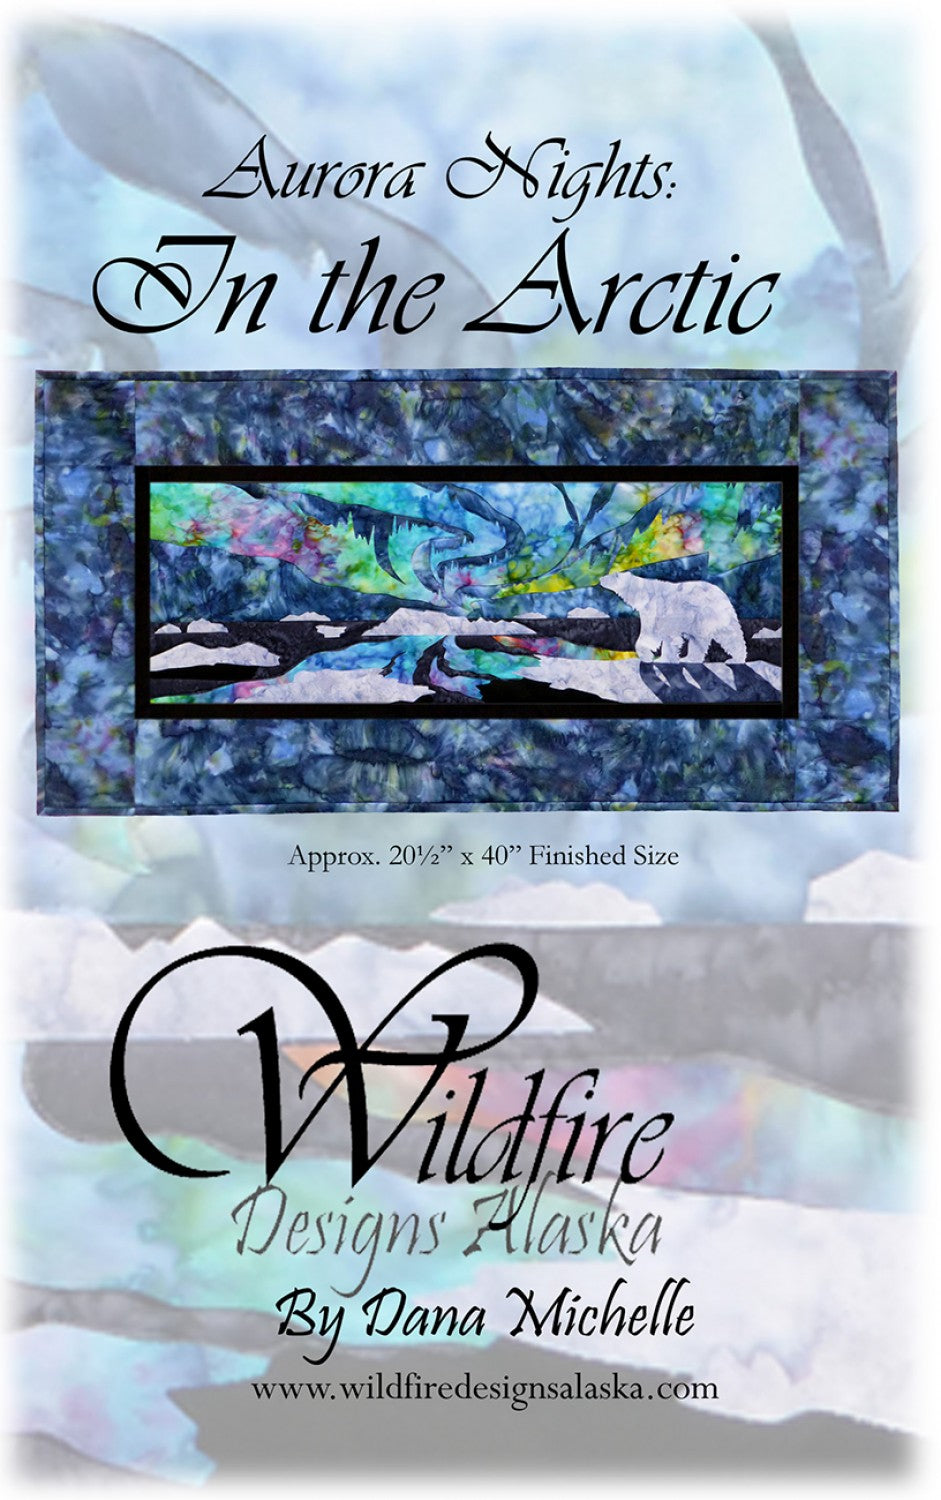 Wildfire Designs Alaska Aurora Nights In the Arctic Laser Cut Applique Pattern Front Cover